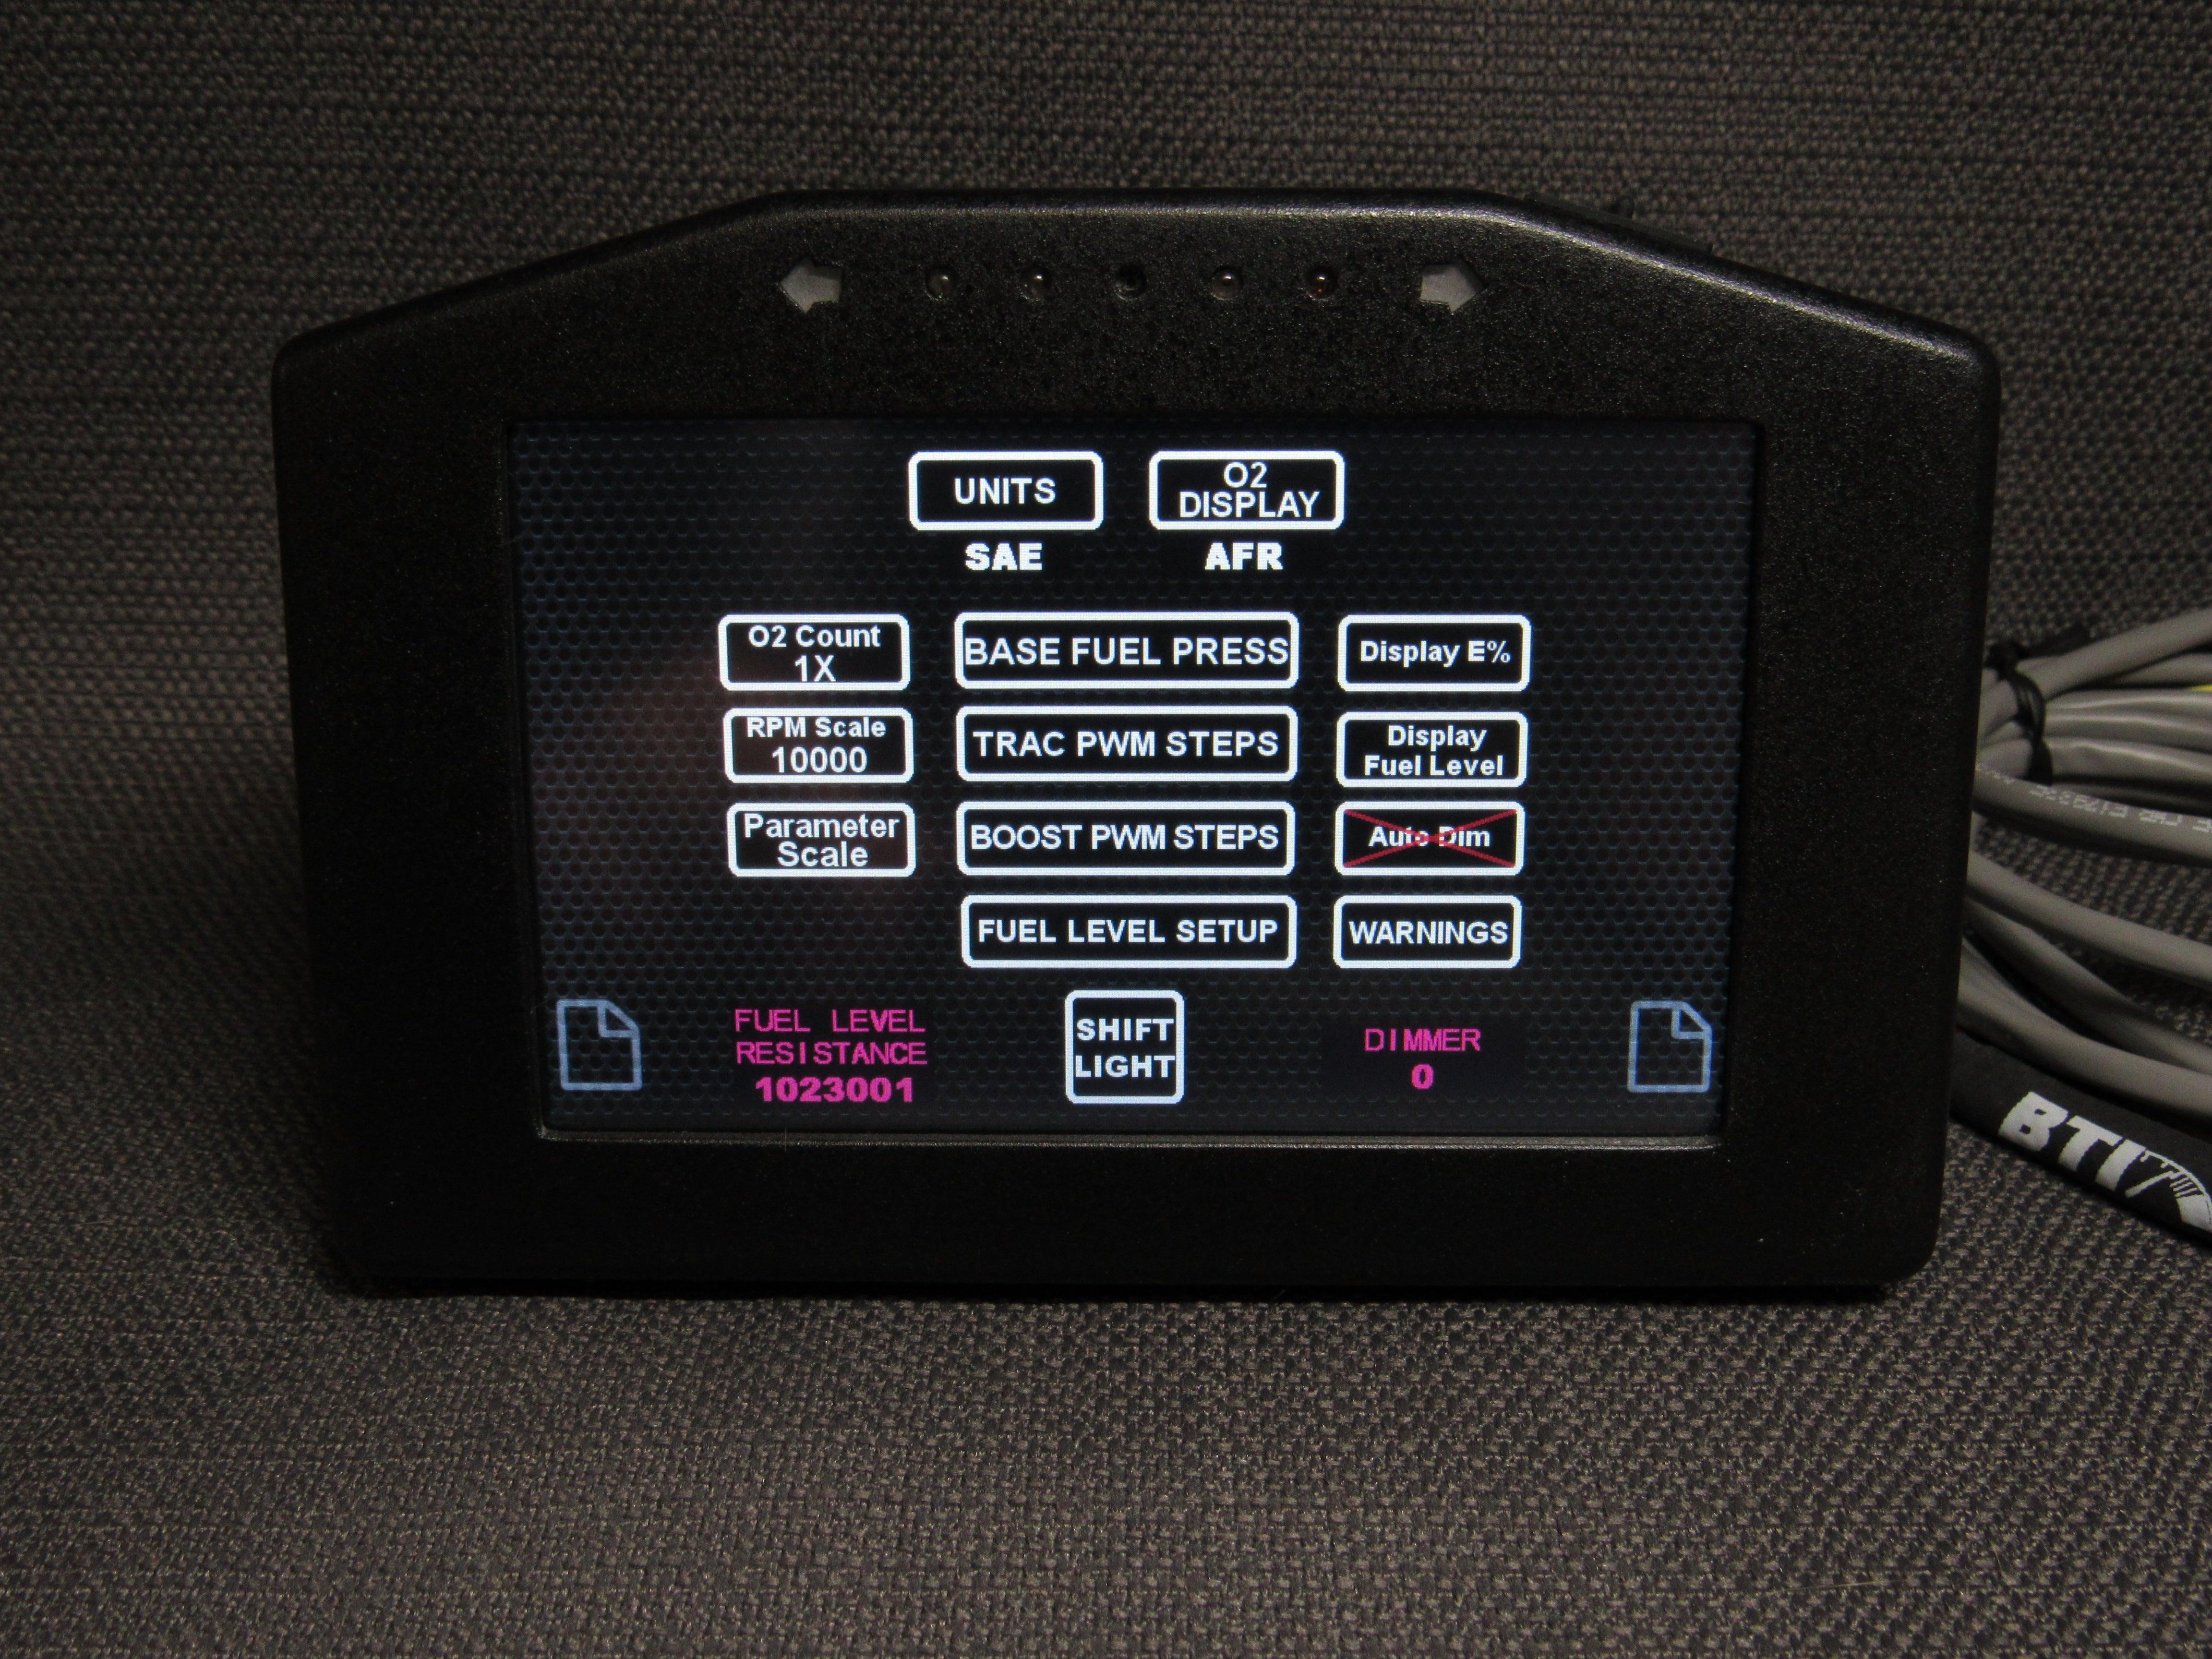 BTI 7" Dash Touch Screen Display from Tuned By Shawn